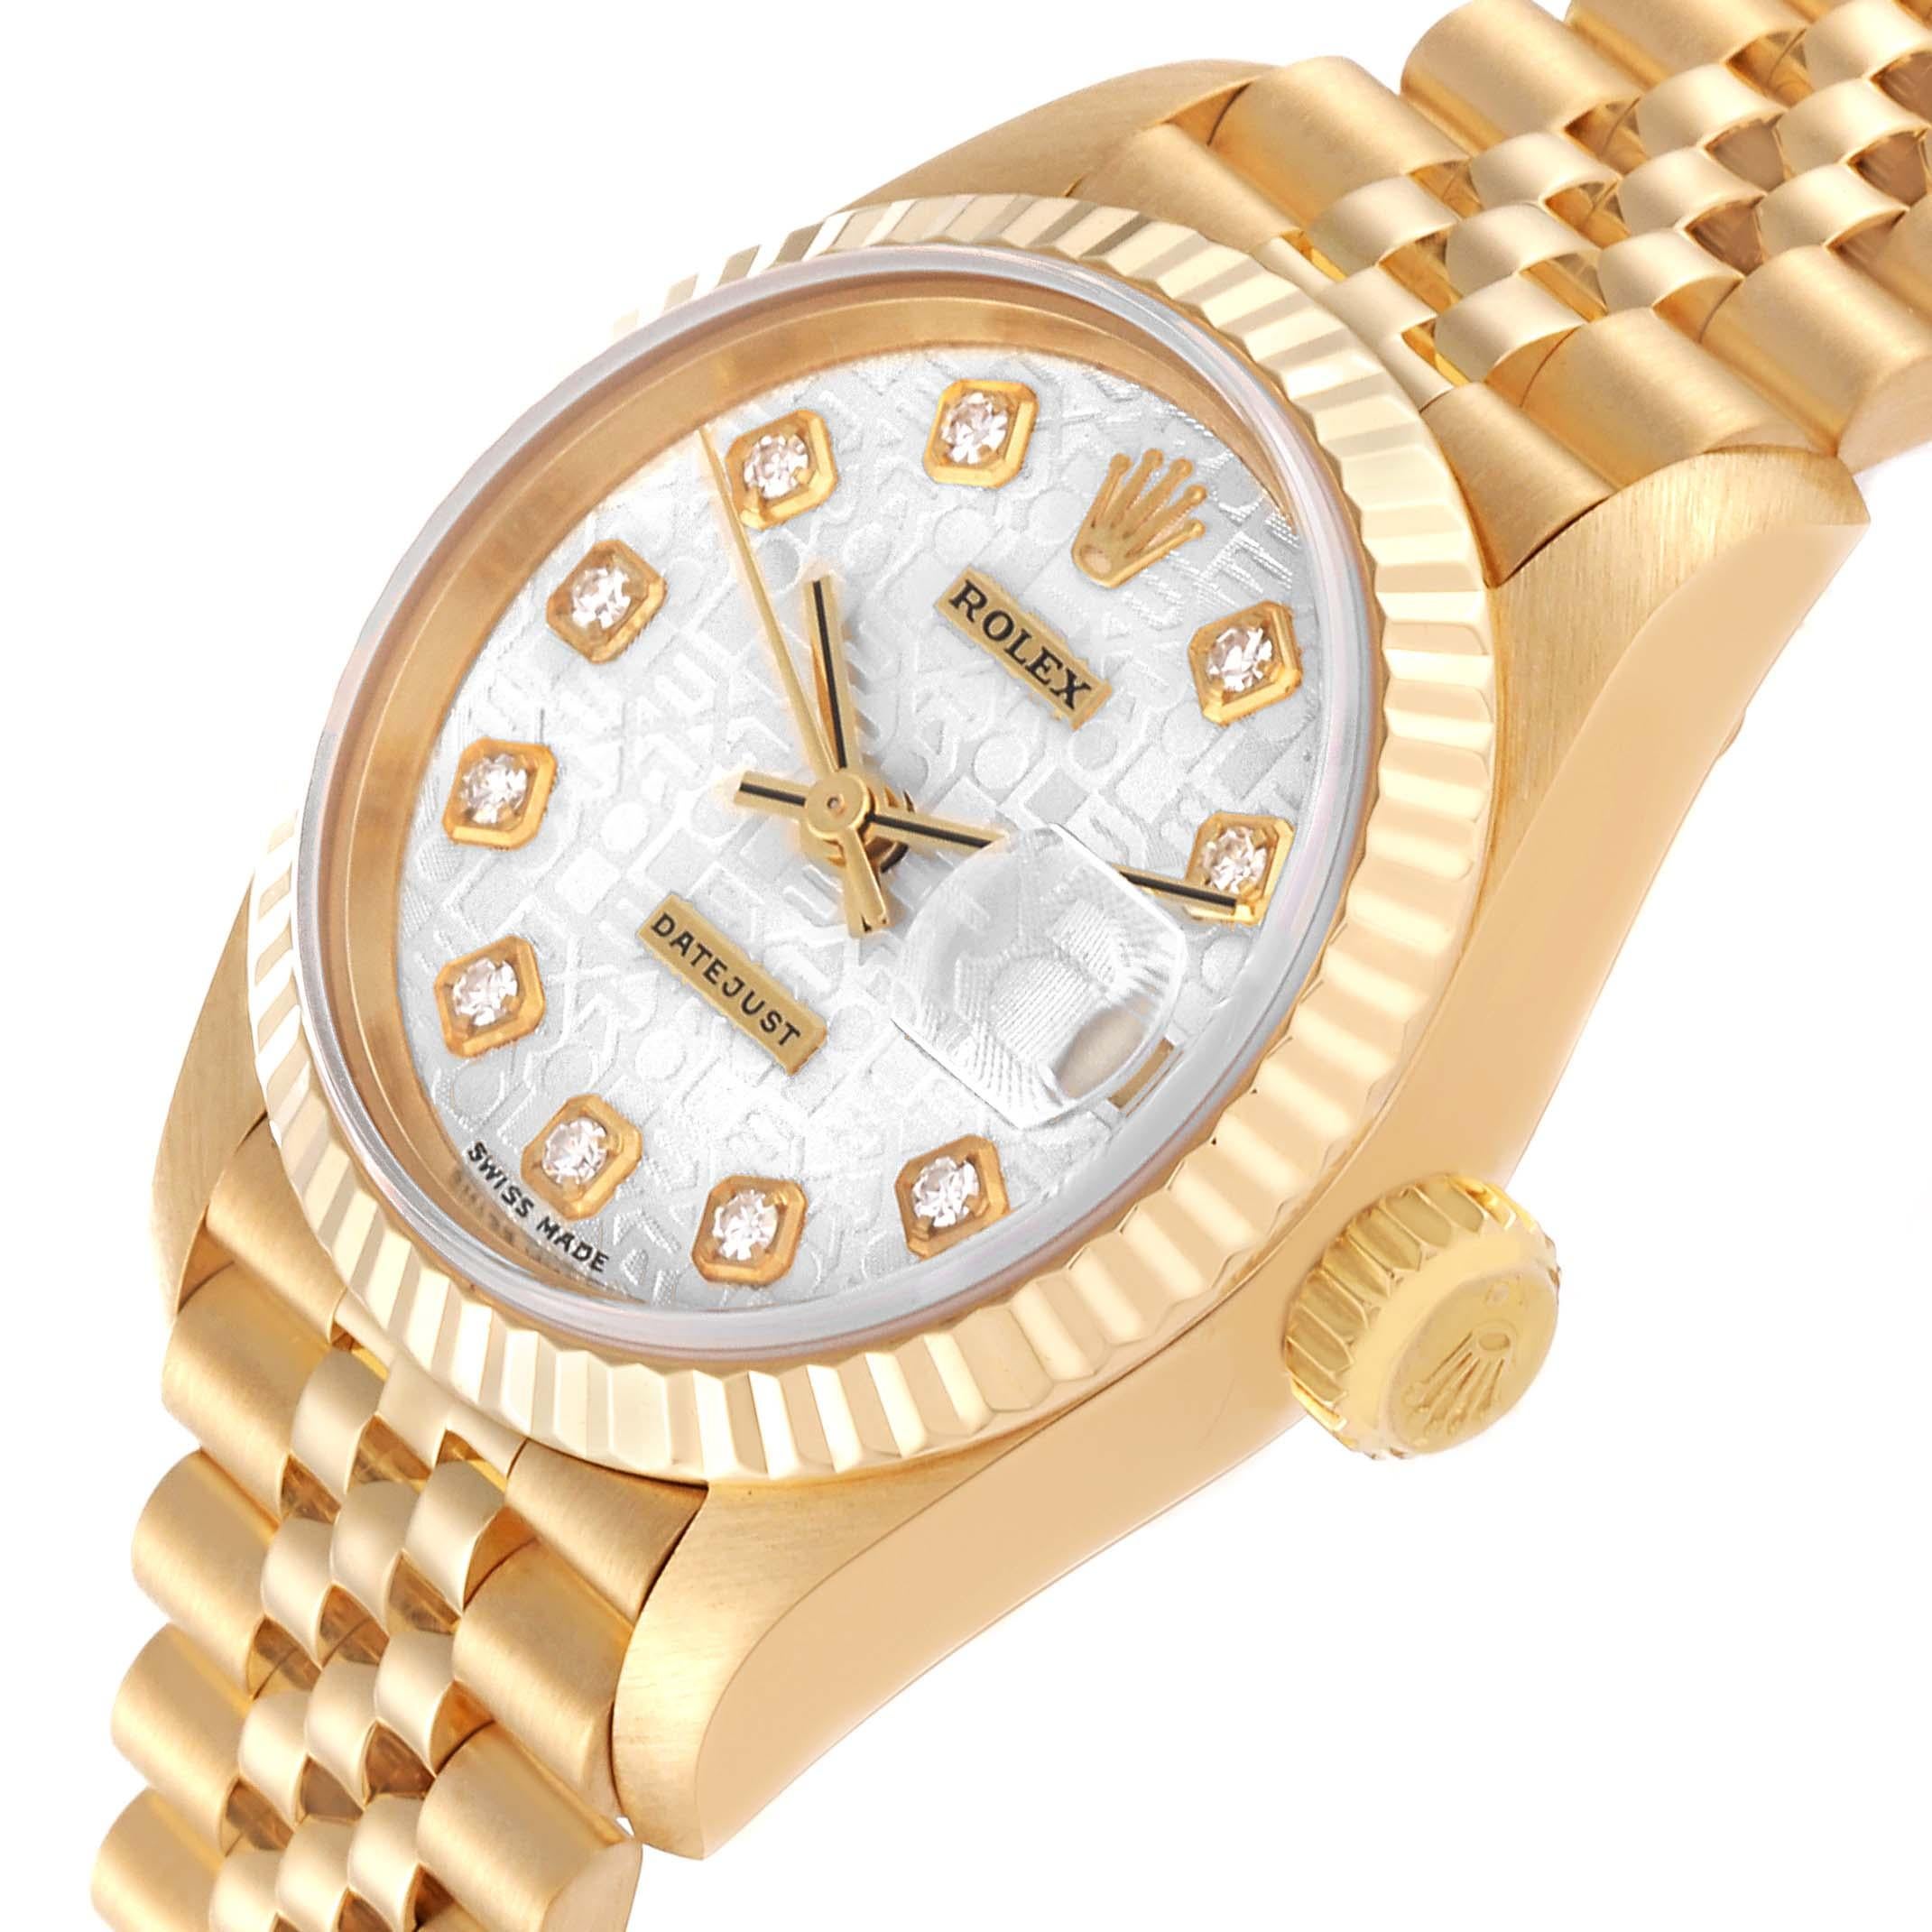 Rolex President Datejust Silver Diamond Dial Yellow Gold Ladies Watch 79178. Officially certified chronometer self-winding movement with quickset date function. 18k yellow gold oyster case 26 mm in diameter. Rolex logo on a crown. 18k yellow gold